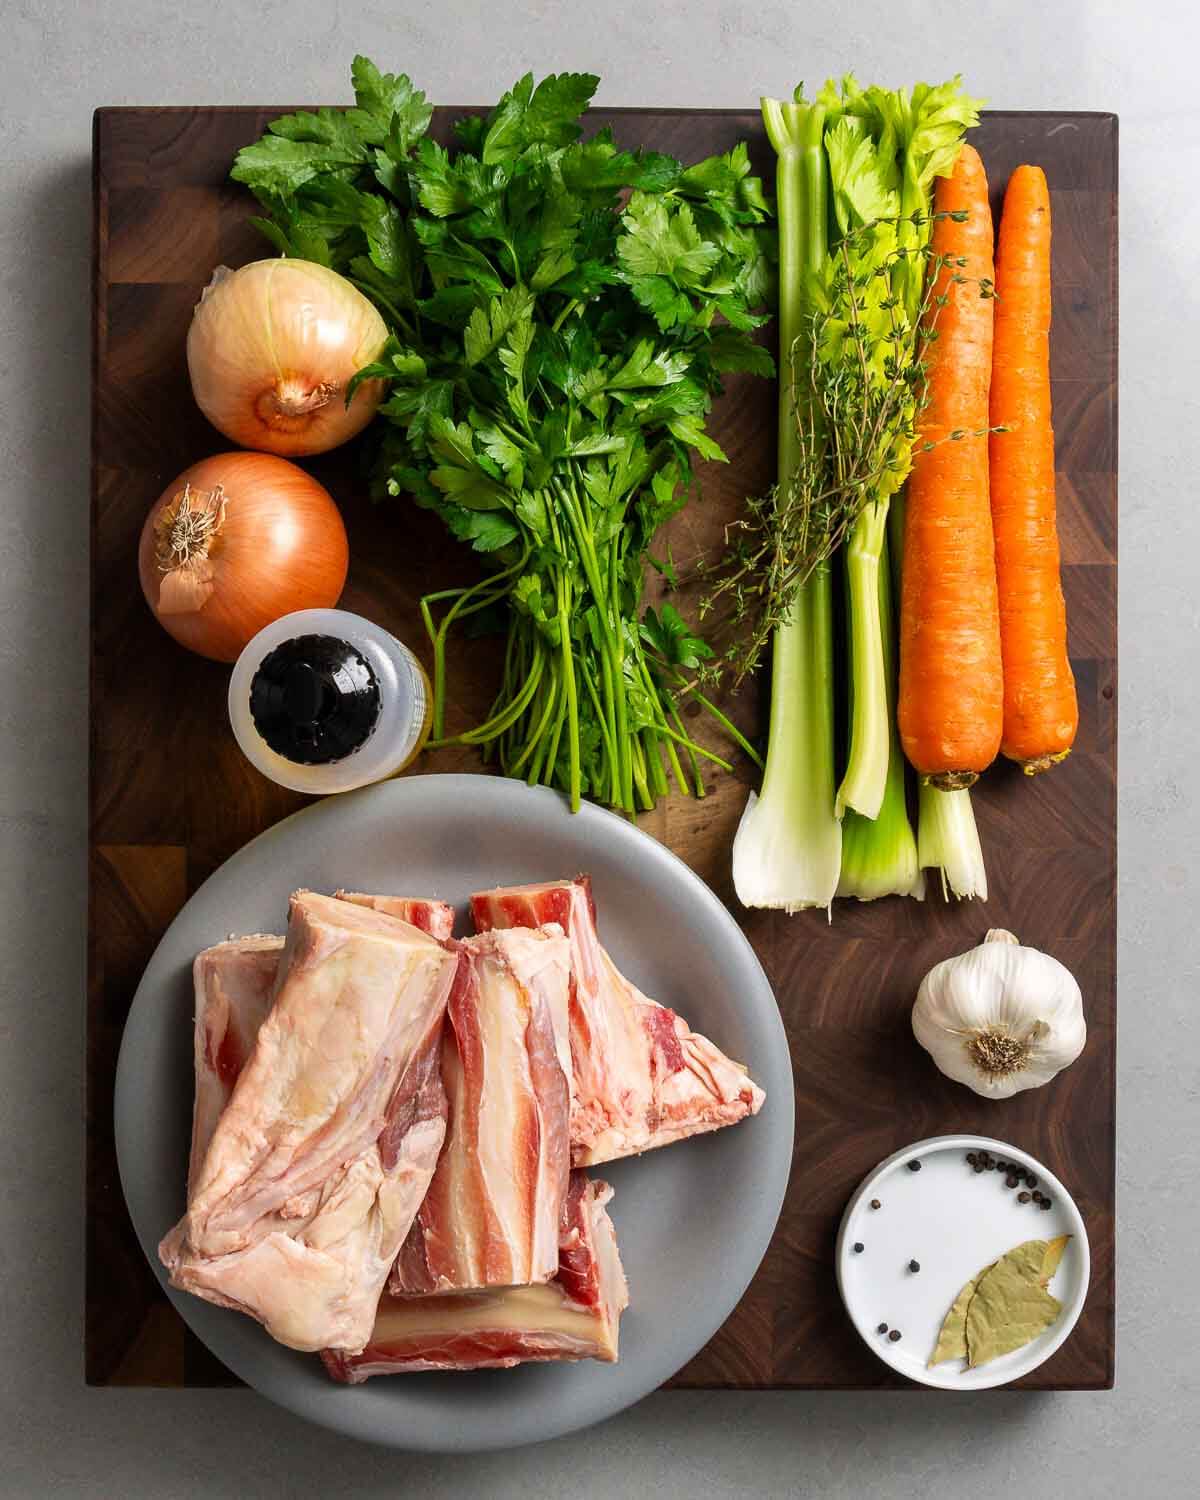 Ingredients shown: onions, parsley, celery, thyme, carrots, olive oil, beef bones, garlic, peppercorns, and bay leaves.